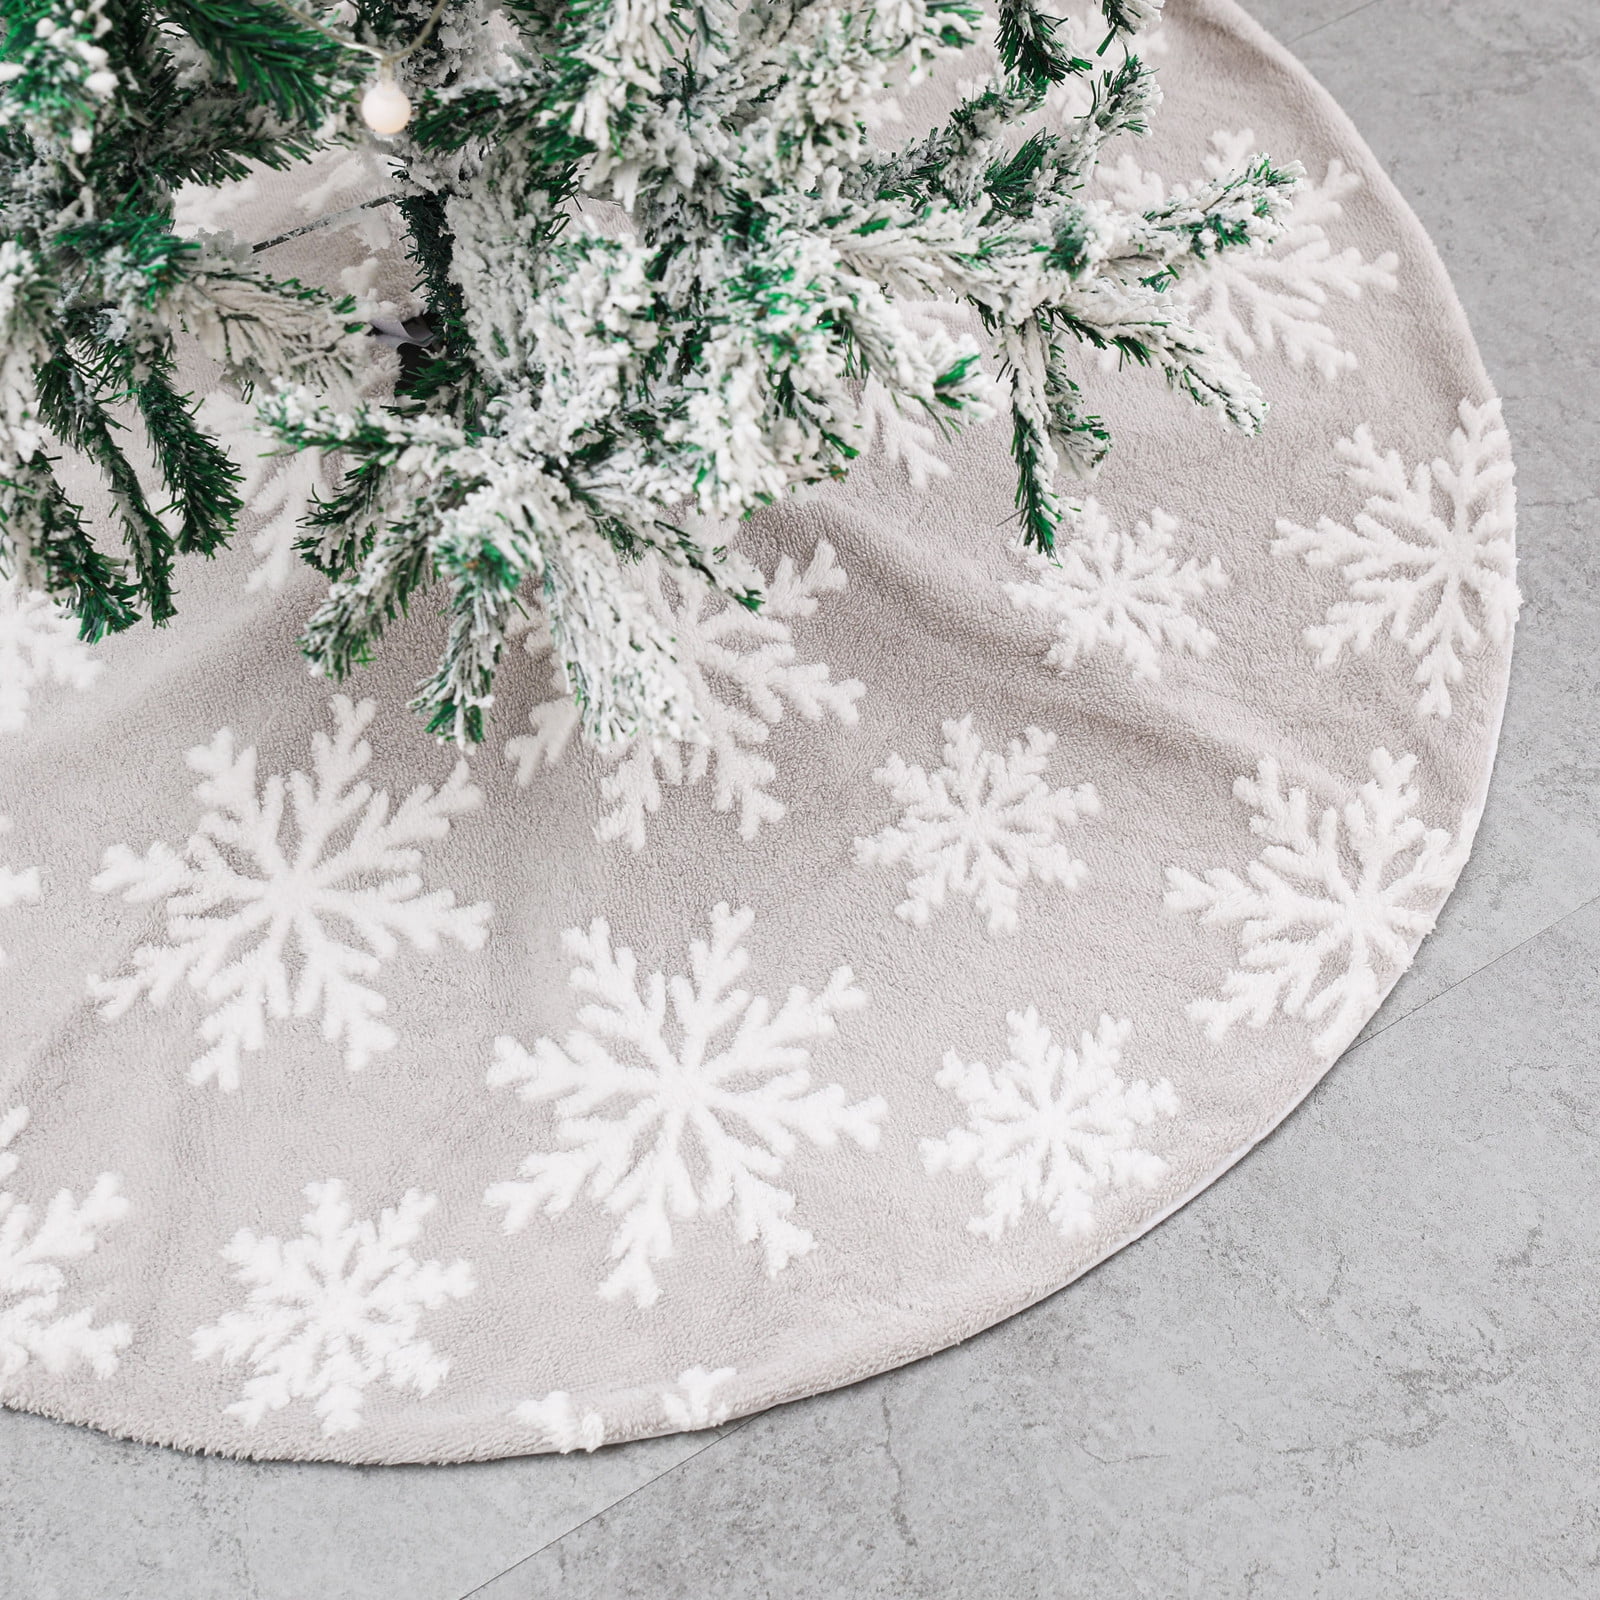 Christmas Tree Skirt with Reindeer Pattern 36 Faux Fur Tree Skirt Grey Super Soft Tree Skirt with Deer and Snowflake Pattern for Ornaments Home Party Christmas Decorations